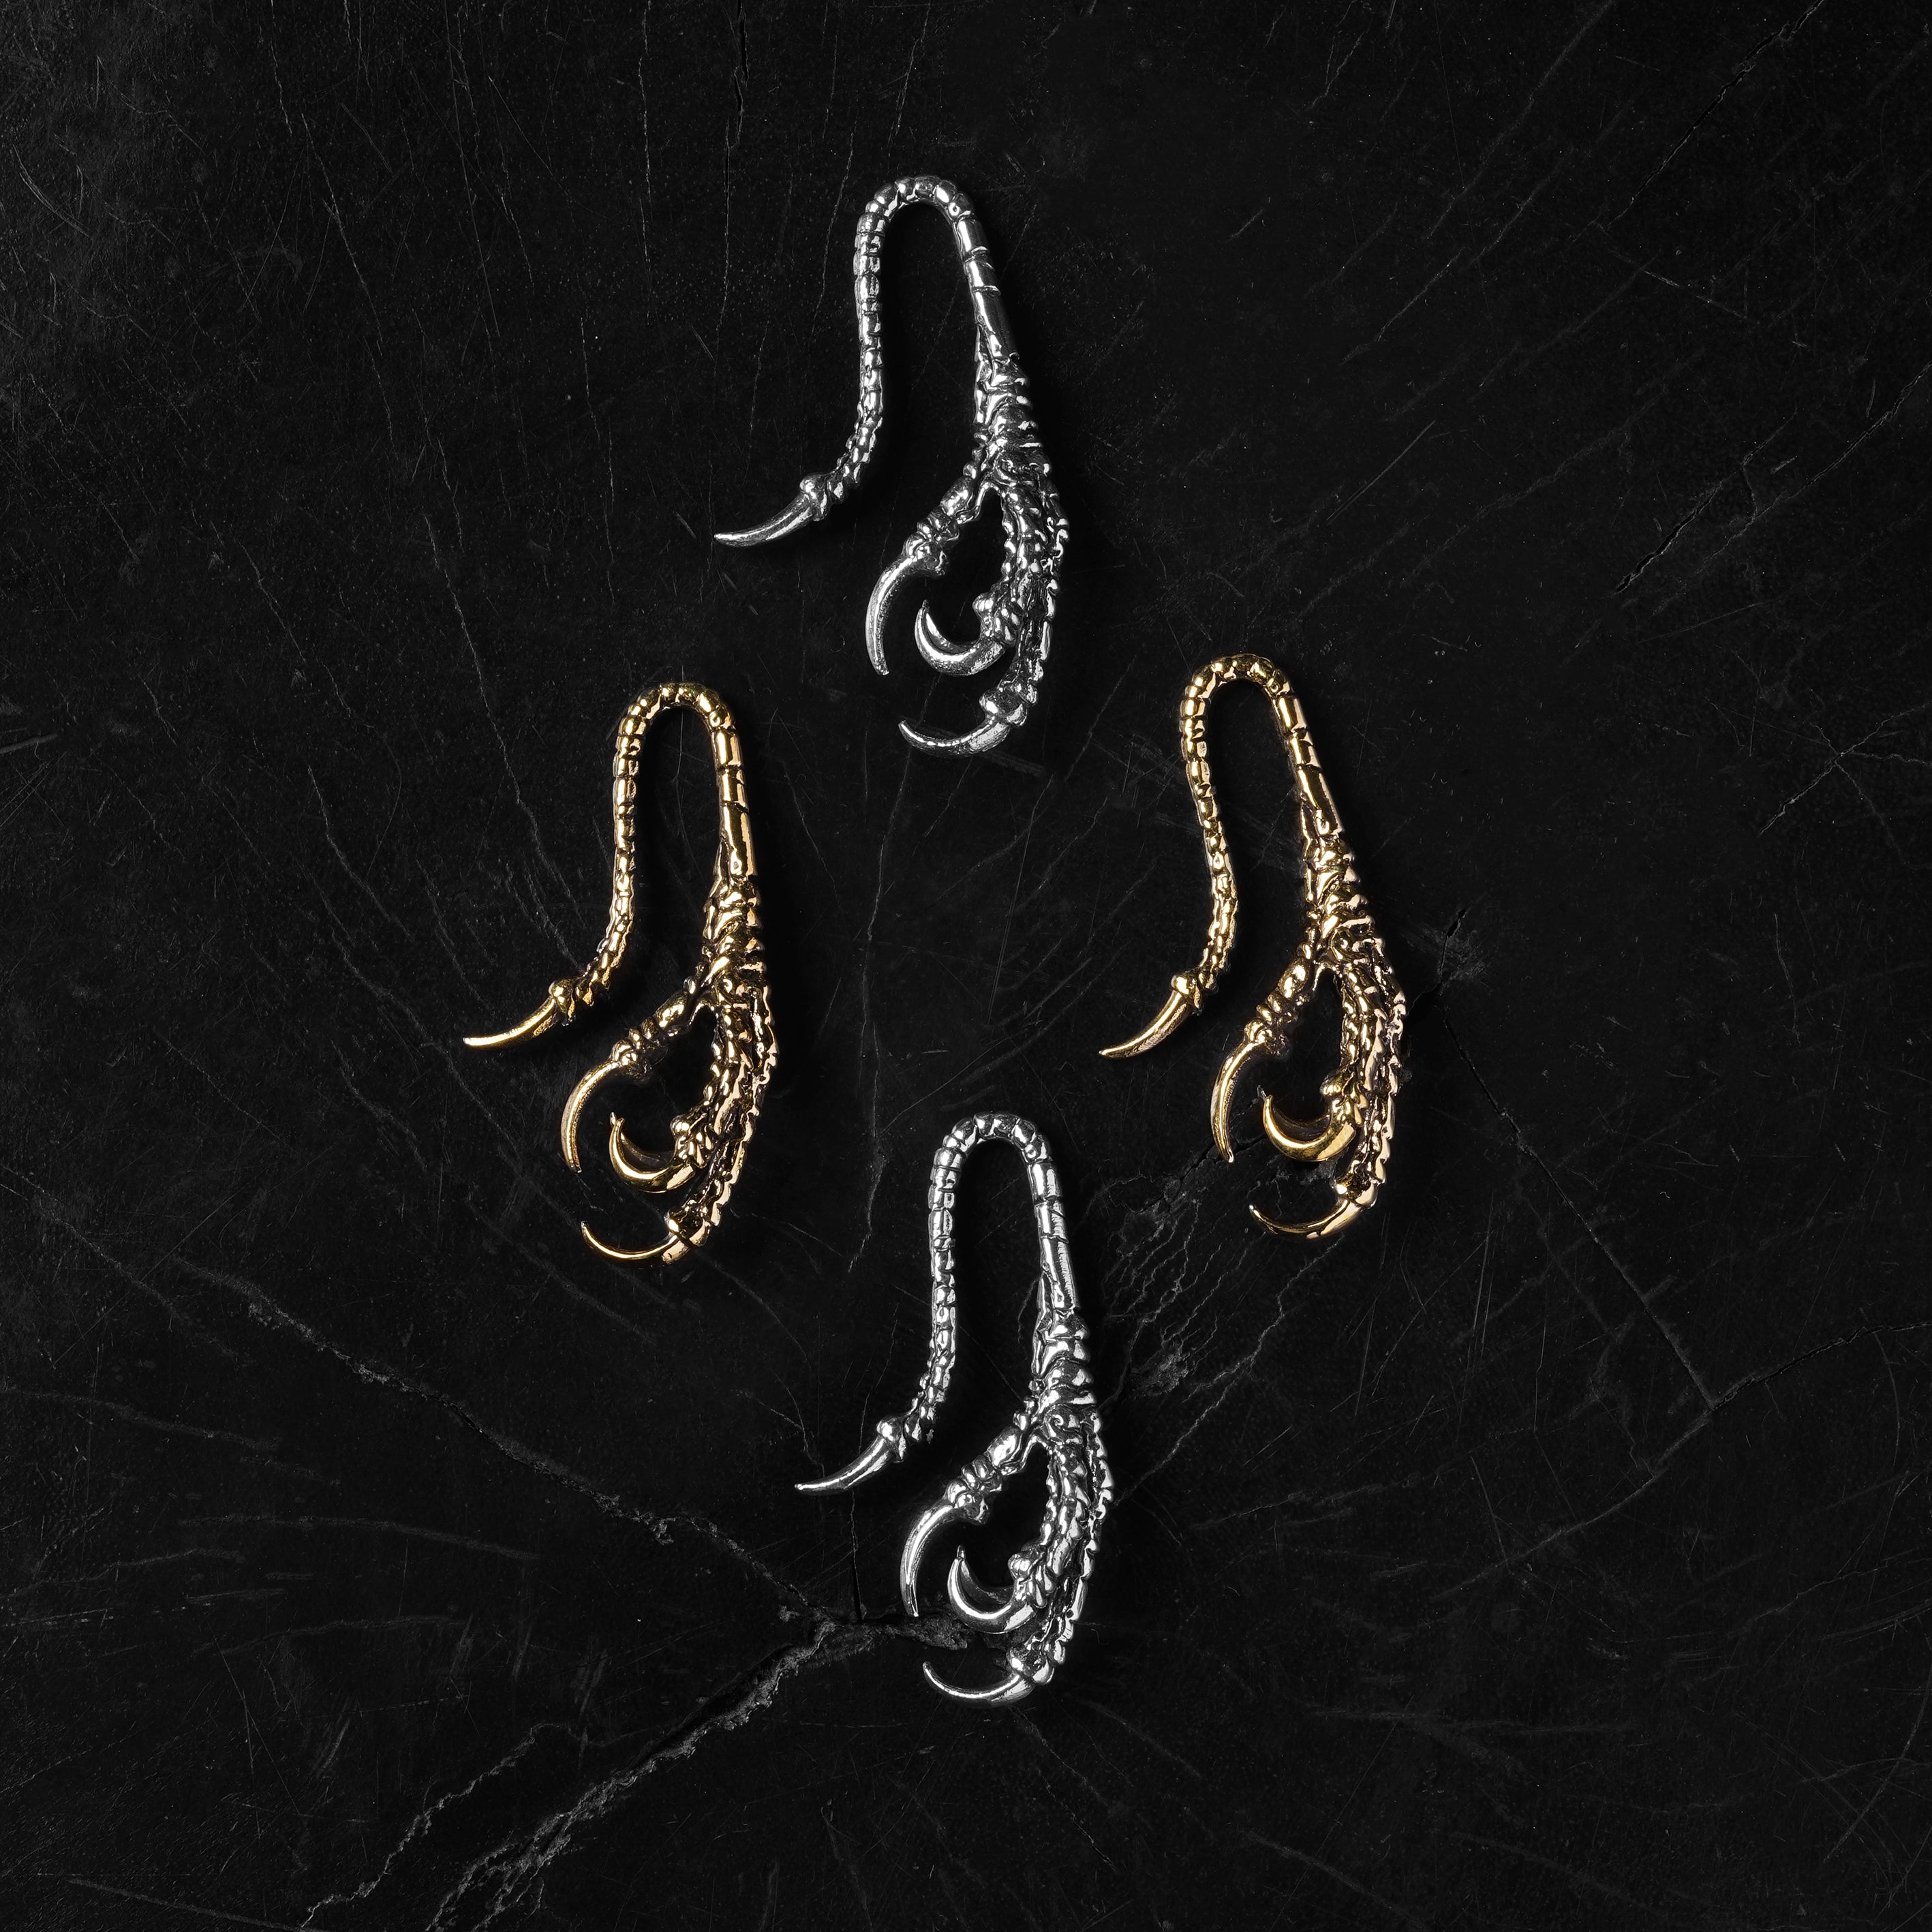 pair of silver and golden brass dragon claw ear hangers